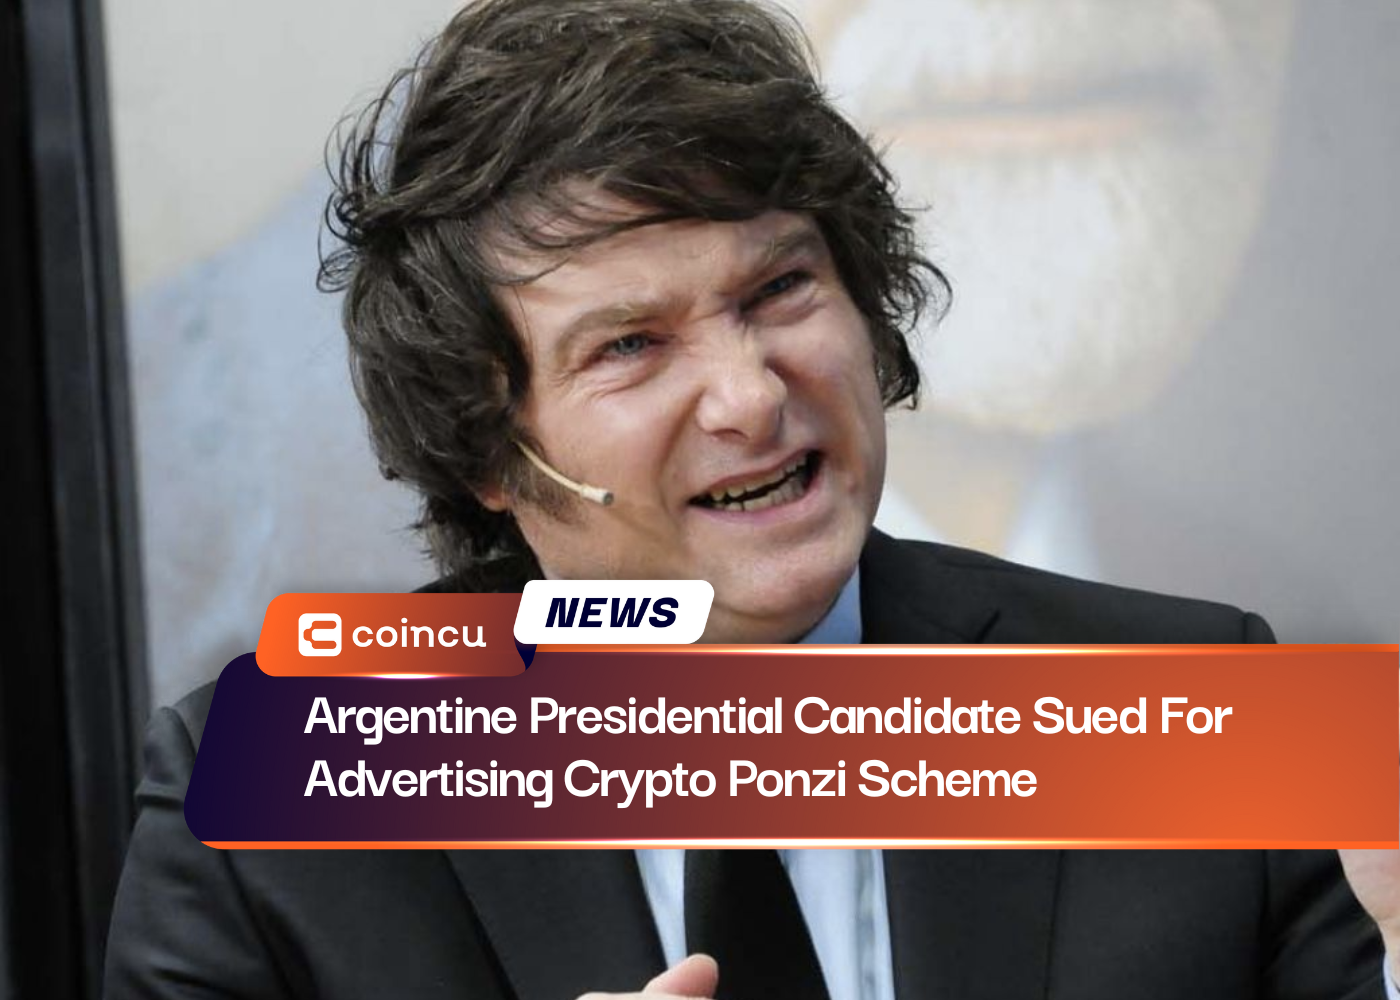 Argentine Presidential Candidate Sued For Advertising Crypto Ponzi Scheme